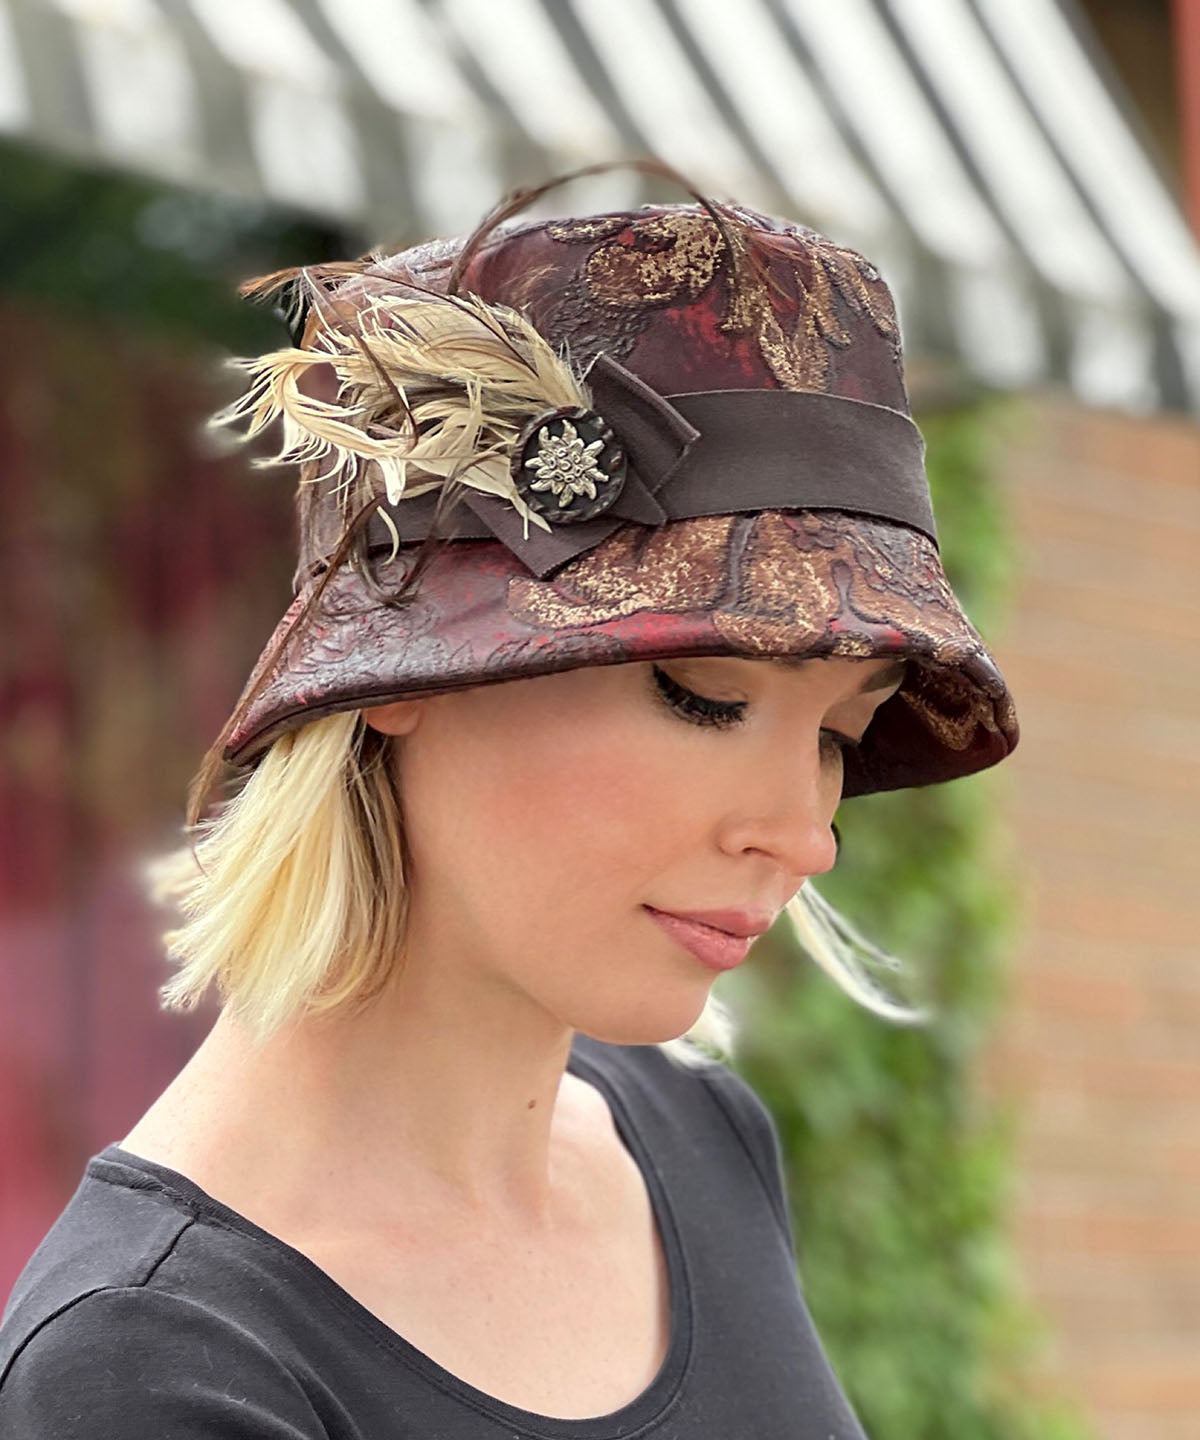 Samantha Bucket Hat | Renaissance In Ox Blood Upholstery | Feather and Button Brooch | Handmade in Seattle, WA USA by Pandemonium Millinery